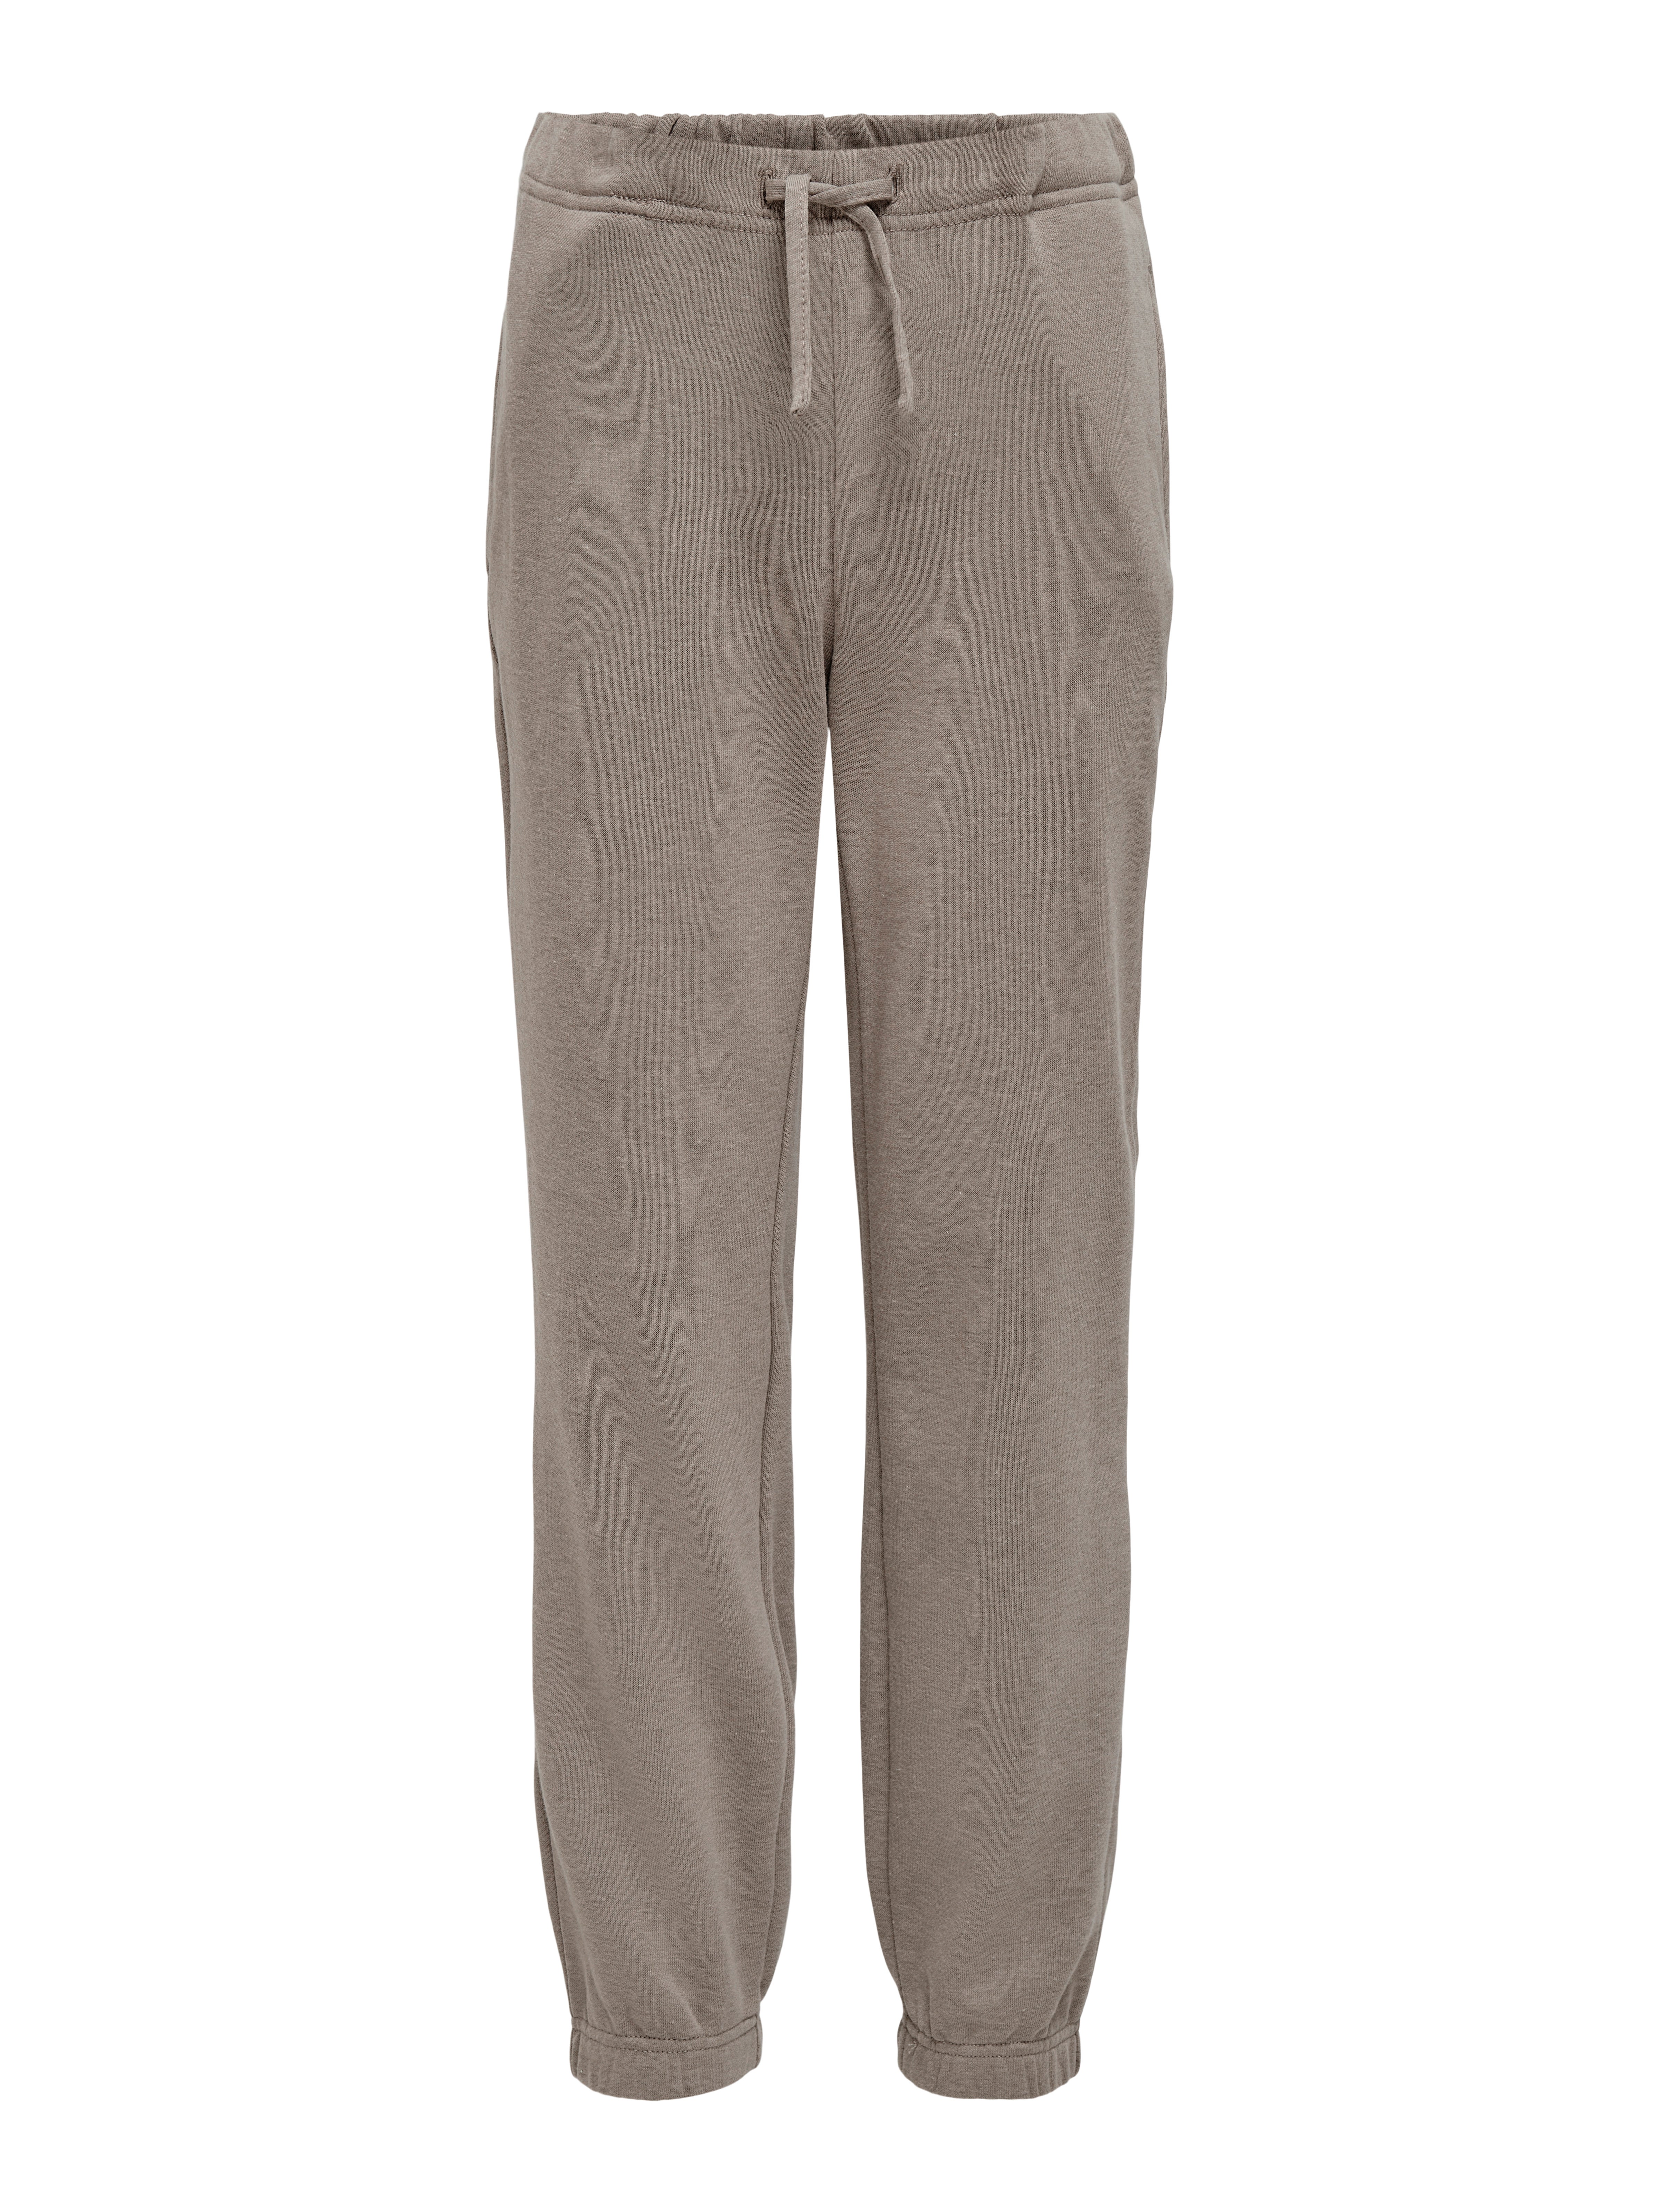 Solid colored Sweatpants | Light Grey | ONLY®